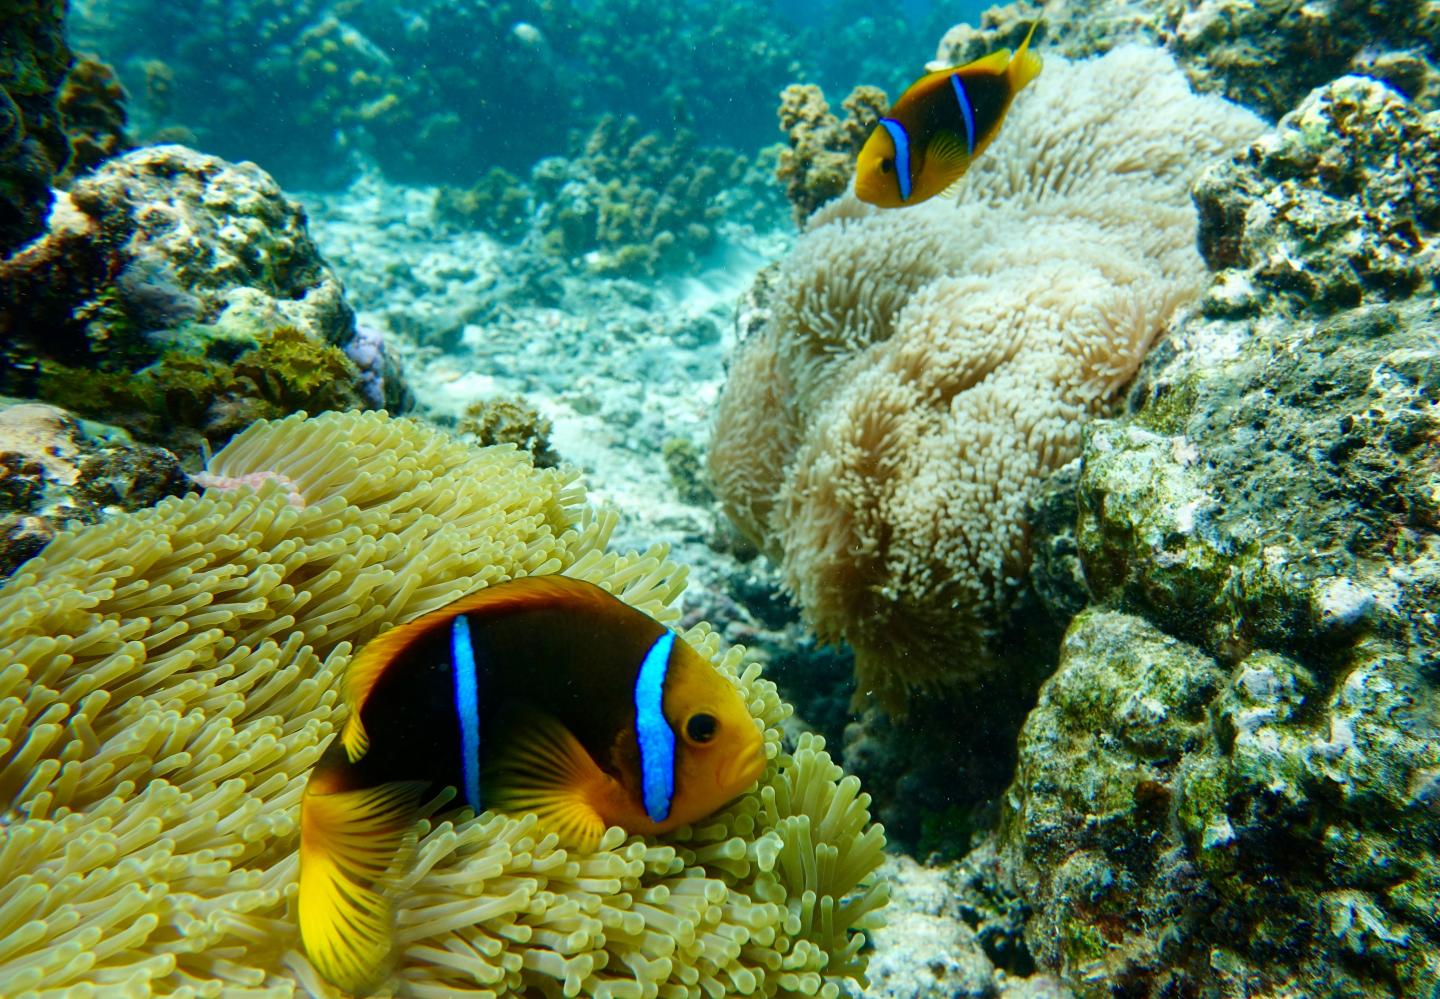 Clownfish and Anemones in the Reefs around Moorea Island